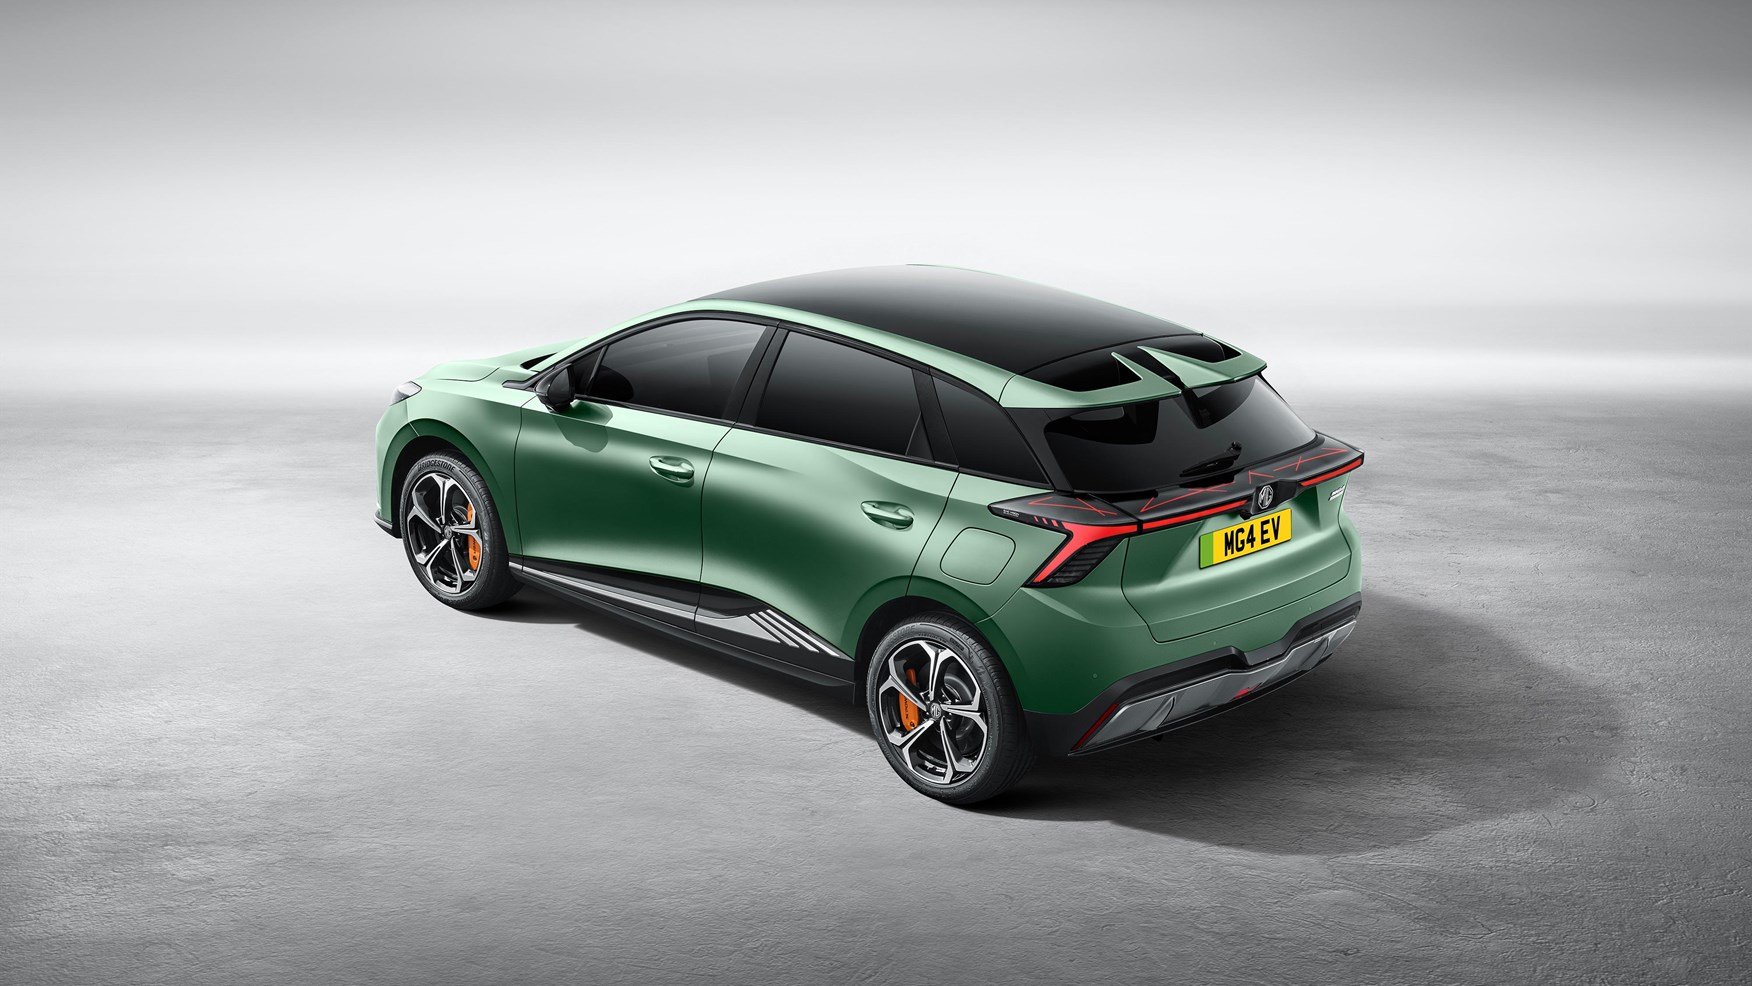 MG to launch hot hatch version of low priced, game-changer MG4